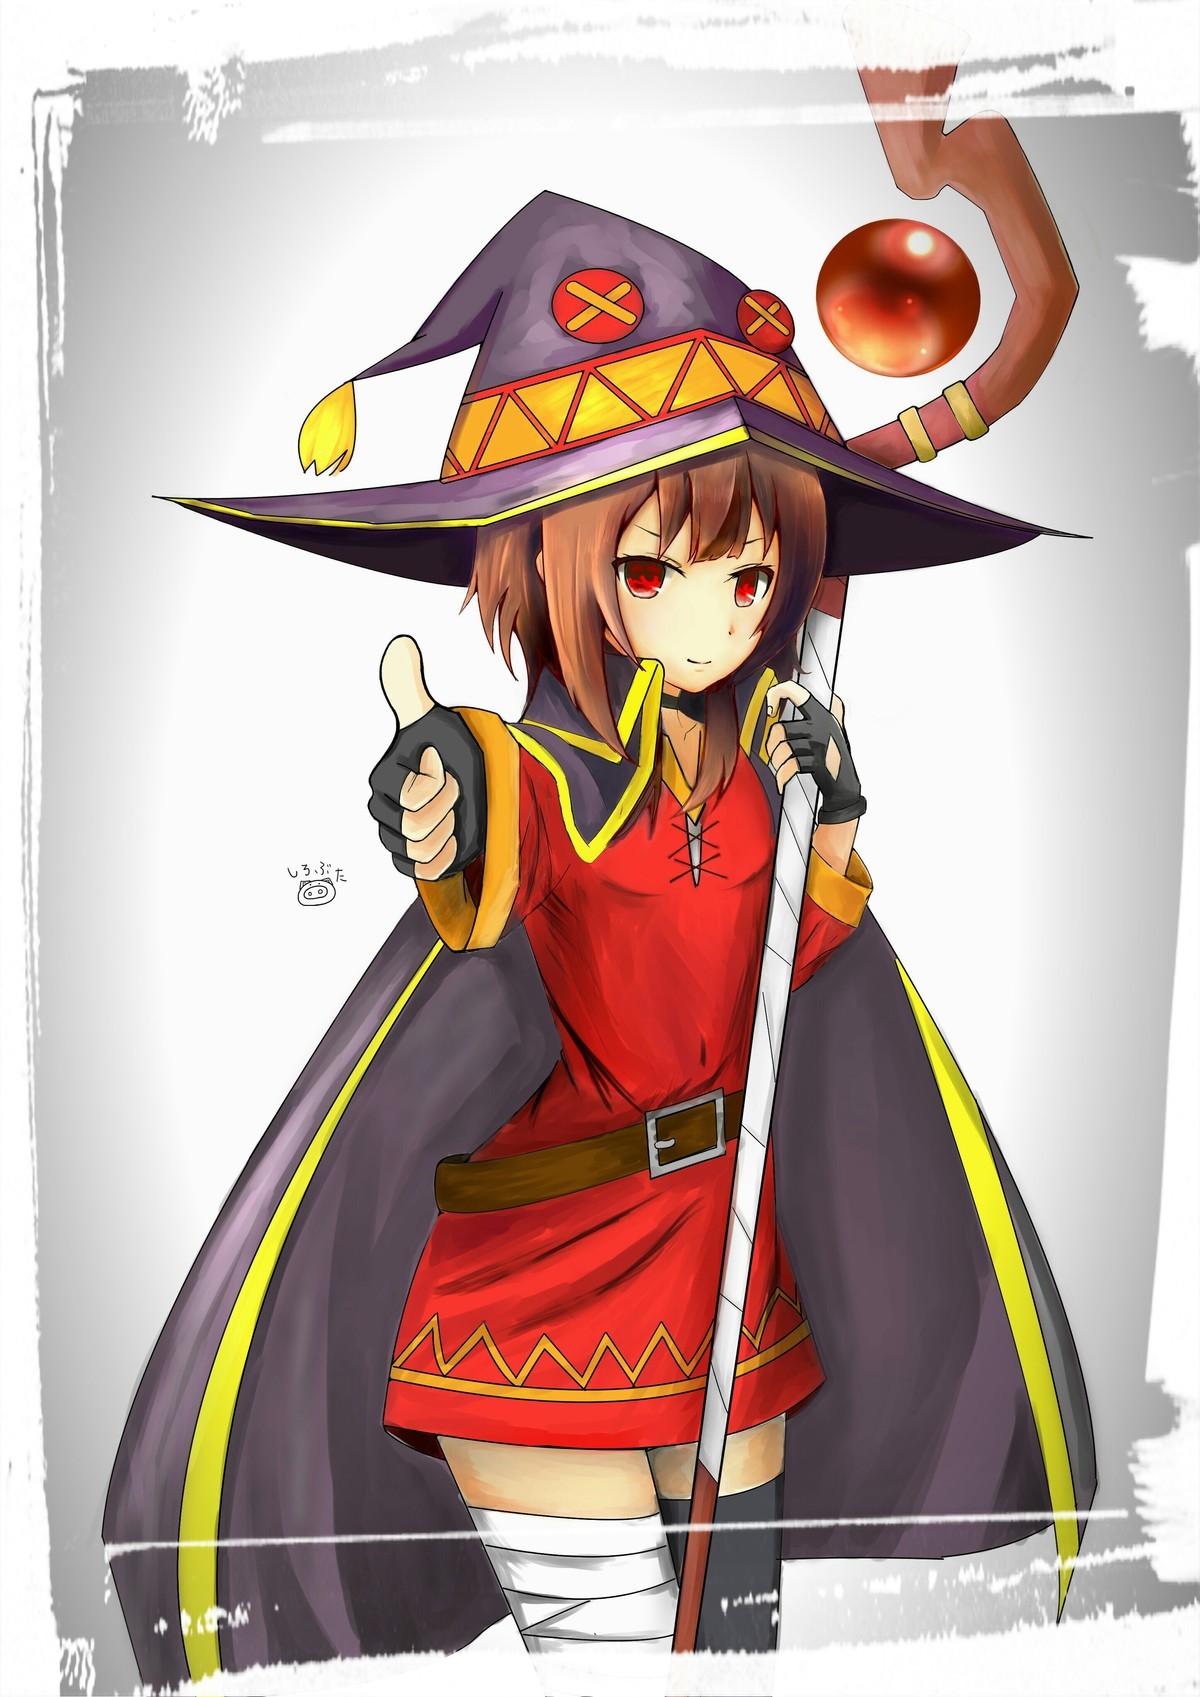 Daily Megu - 1029: Thumb for you. join list: DailySplosion (827 subs)Mention History Source: .. I like this artstyle